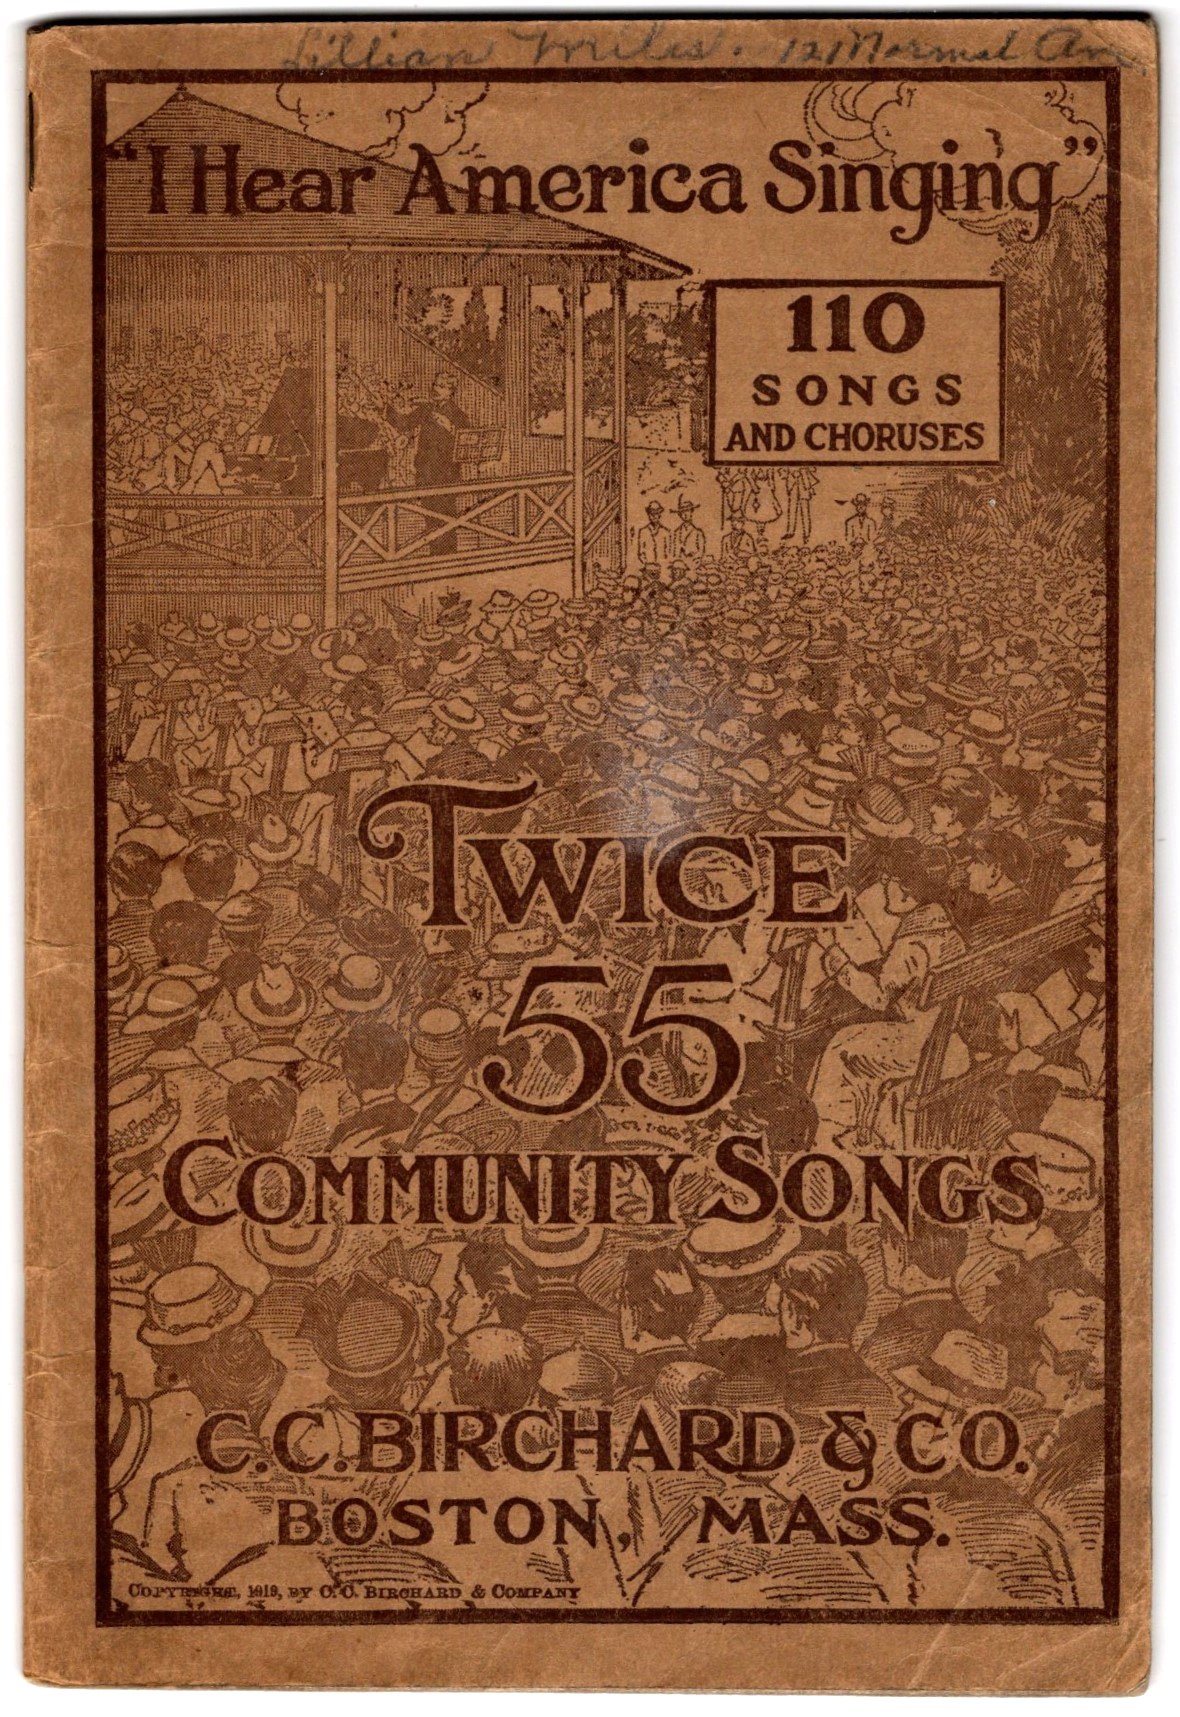 Image for Twice 55 Community Songs :  110 Songs and Choruses, I Hear America Singing